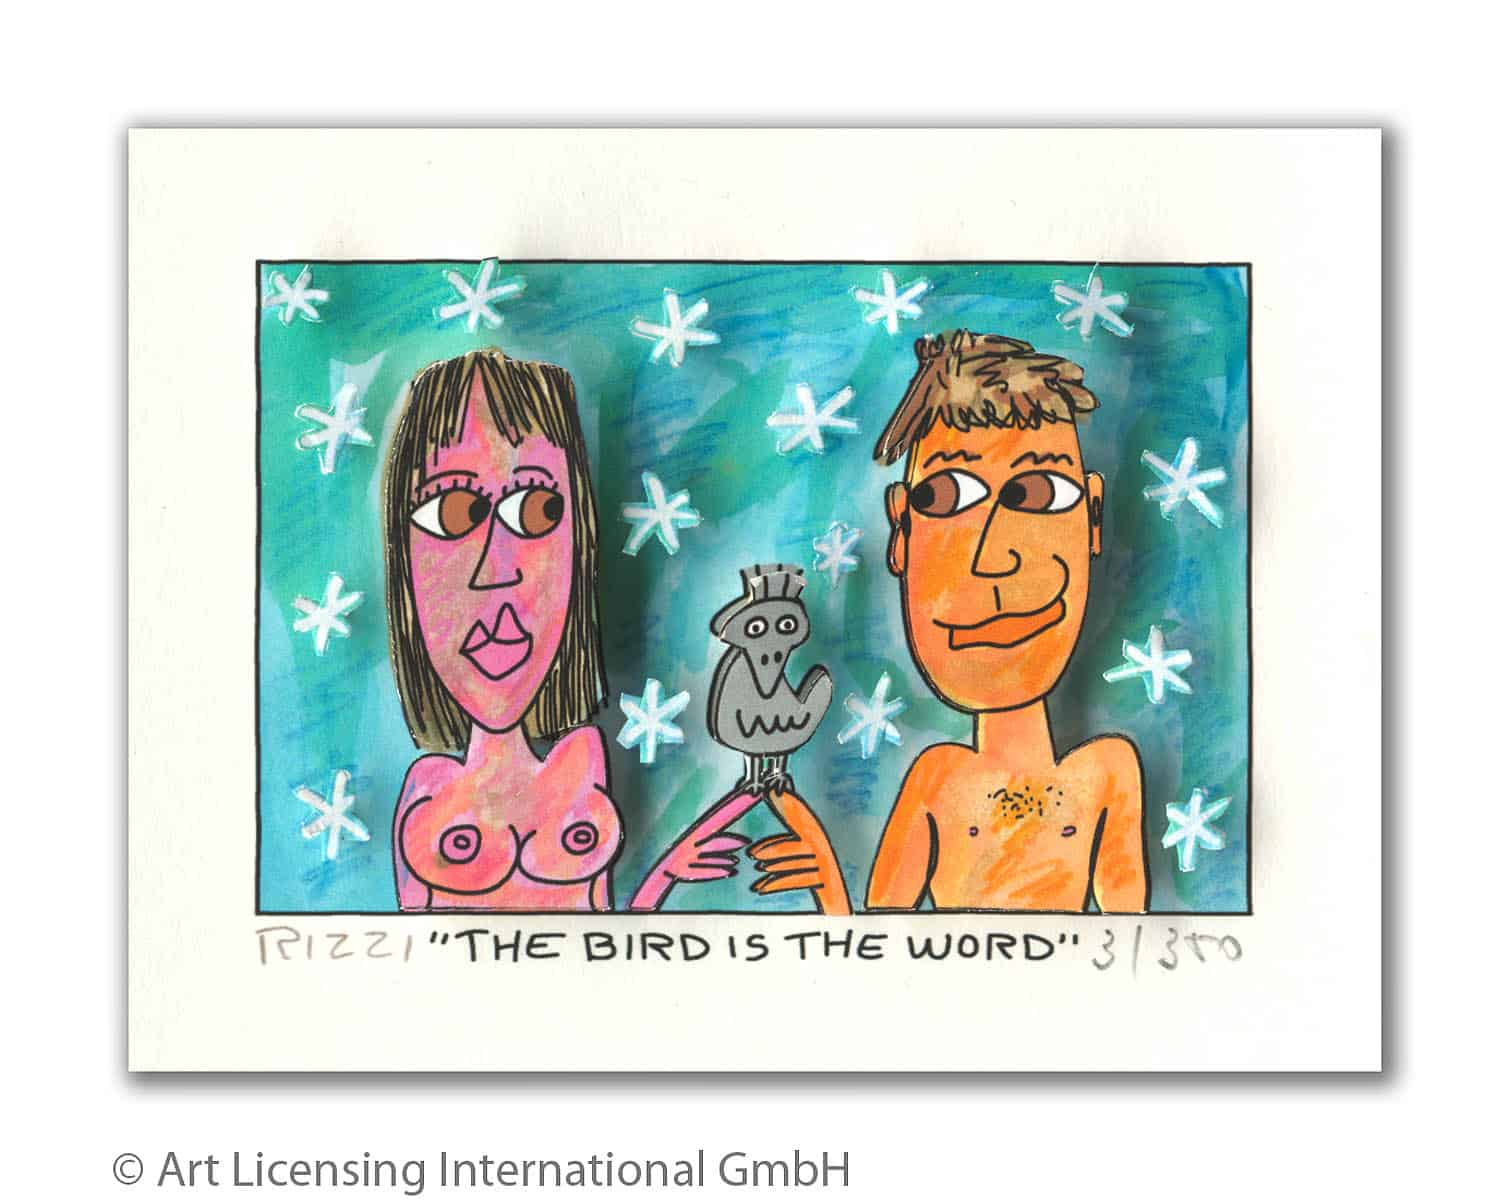 James-Rizzi-The-bird-is-the-word